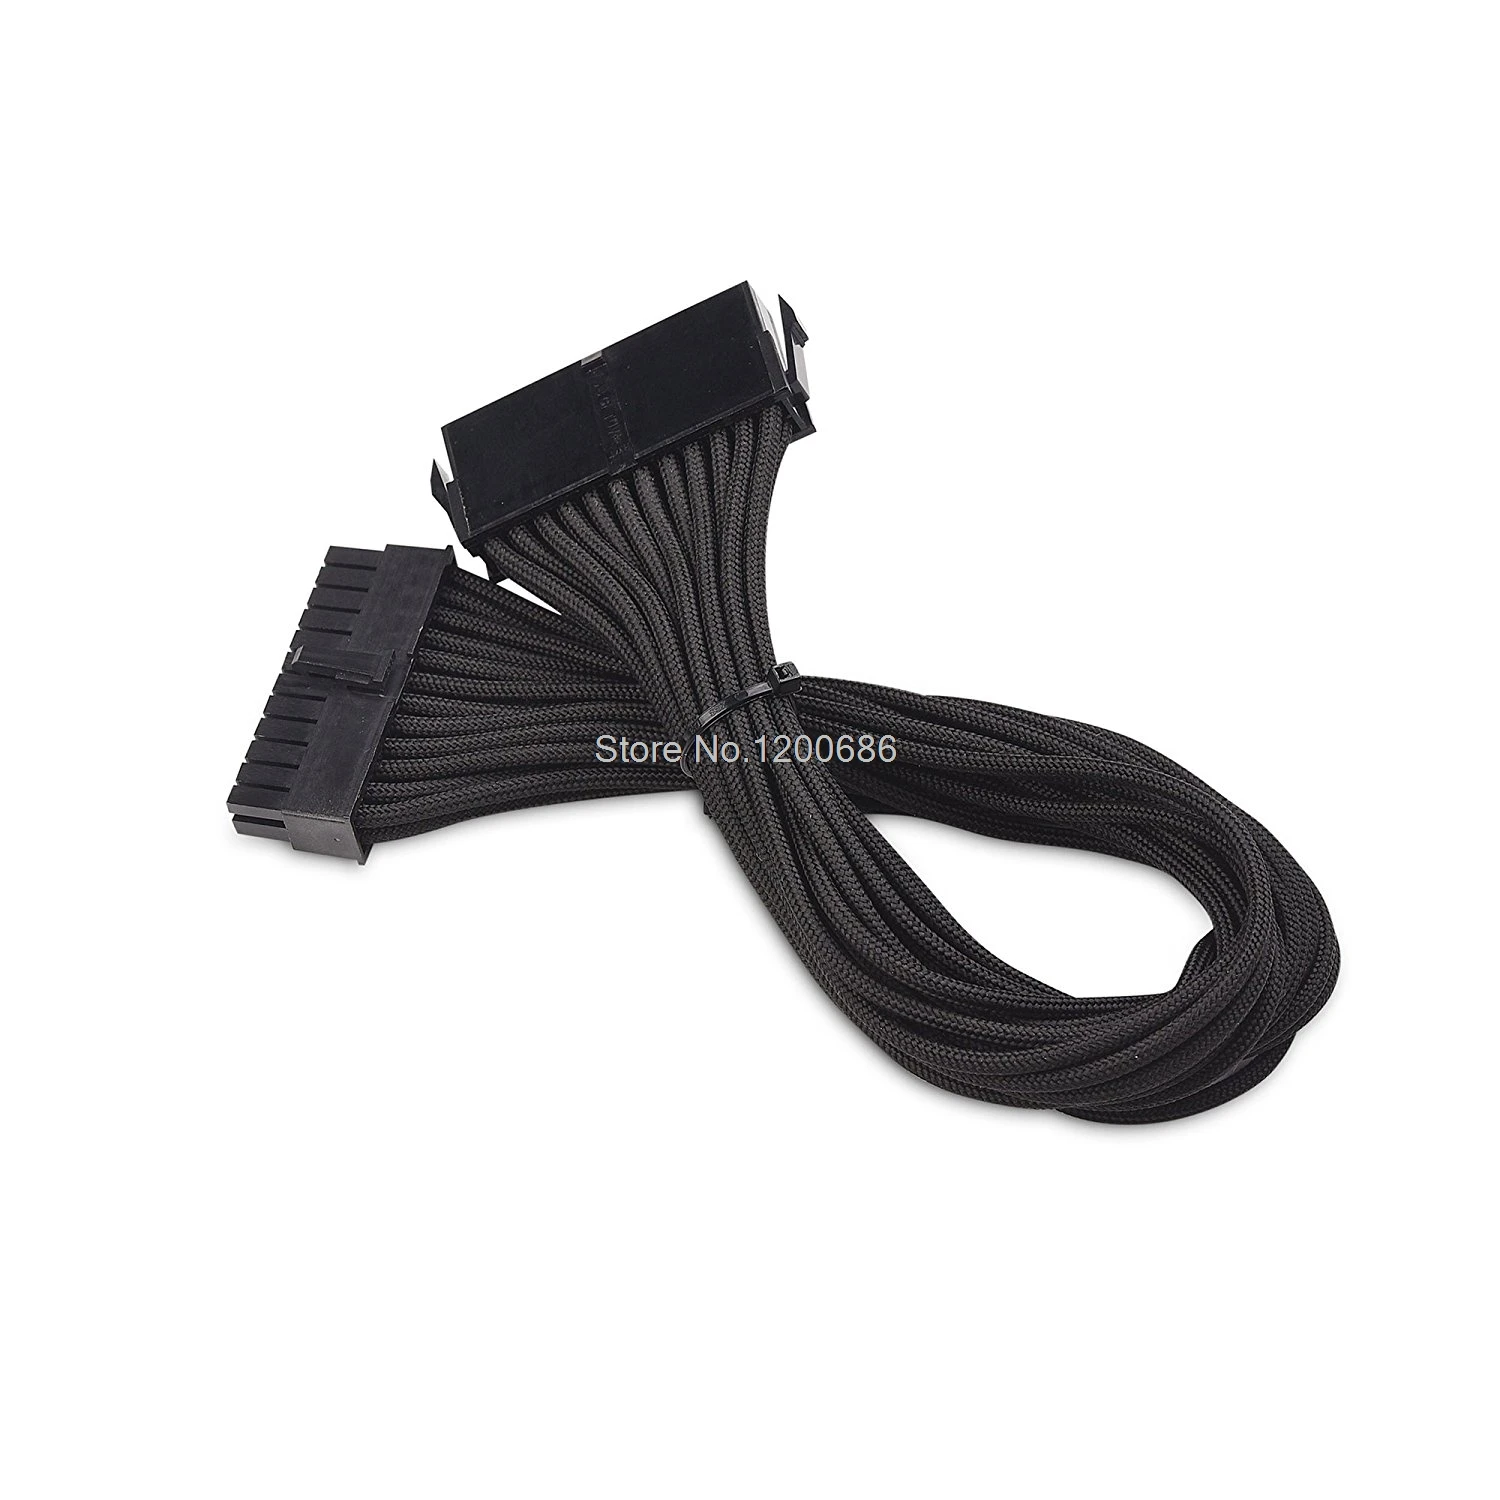 Купи ATX 24-Pin Male ATX 24-Pin Female 18 AWG 300mm / 12in extension wire harness for ATX Power Supply Male to Female Extension Cable за 594 рублей в магазине AliExpress